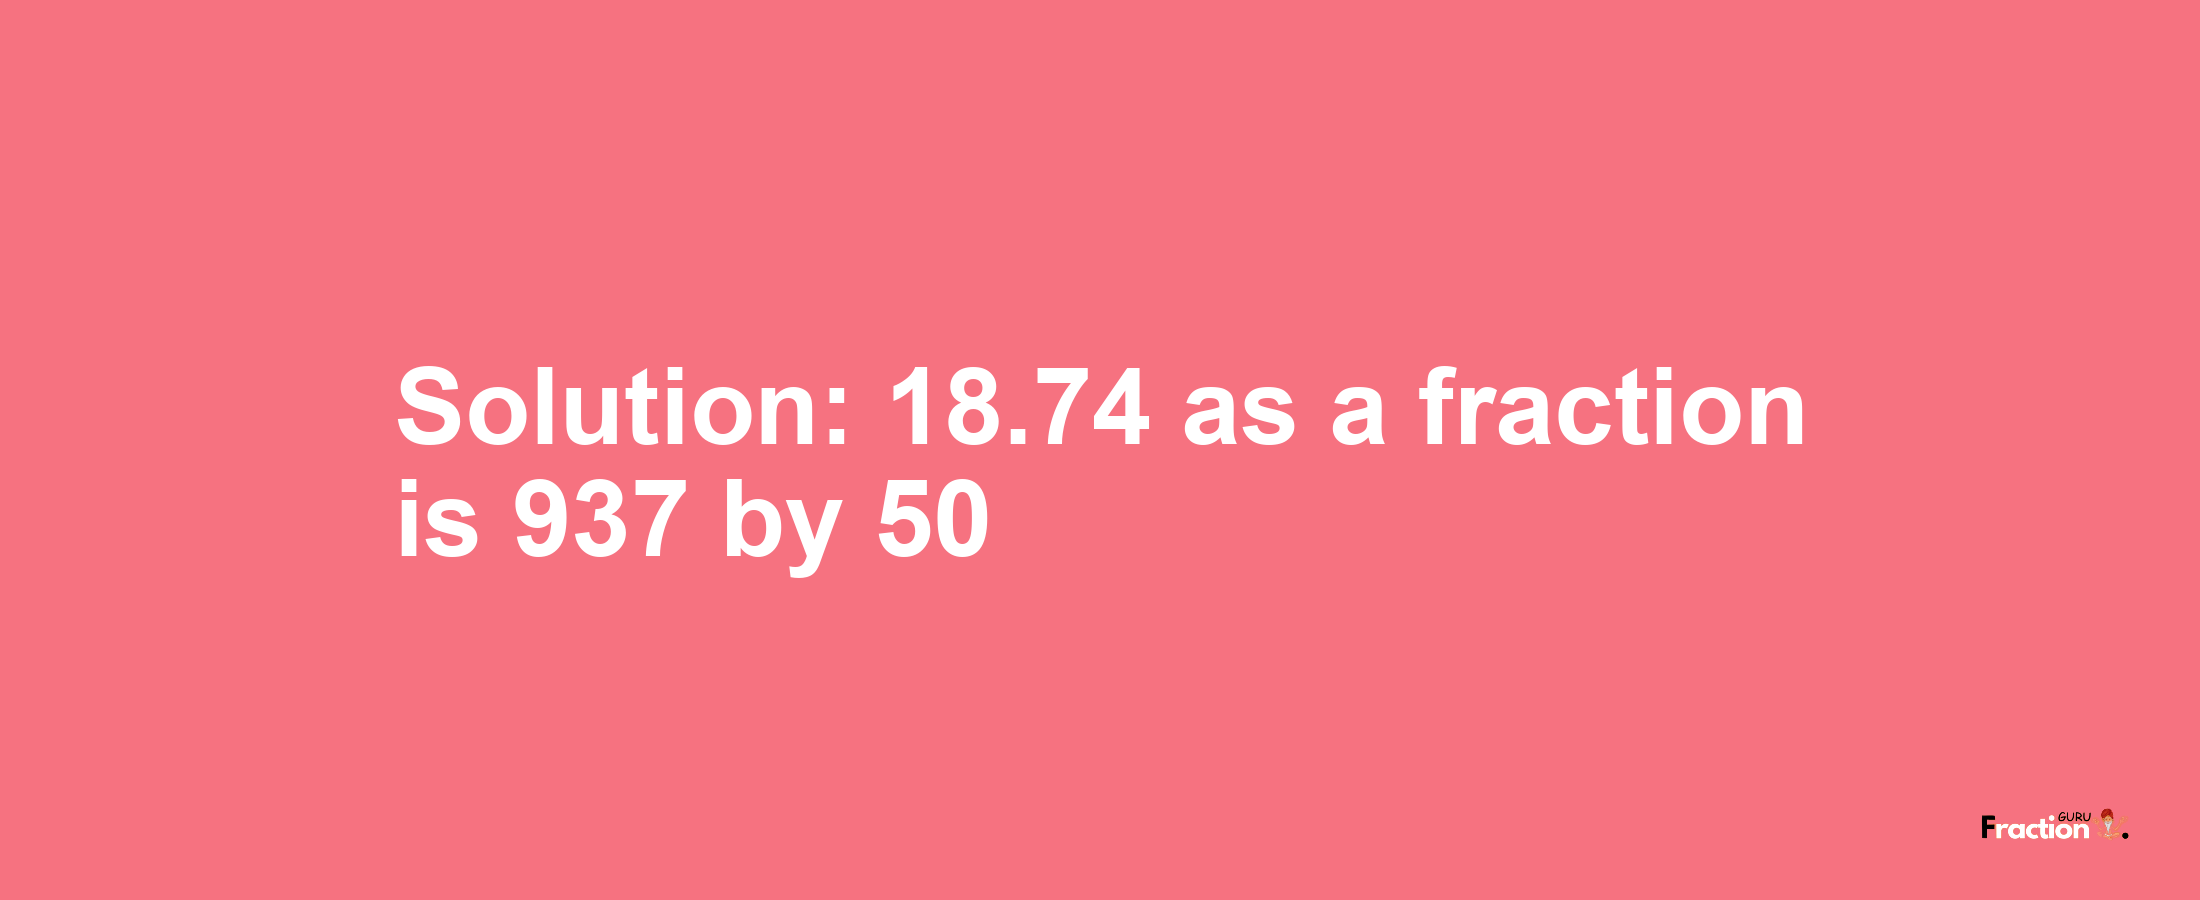 Solution:18.74 as a fraction is 937/50